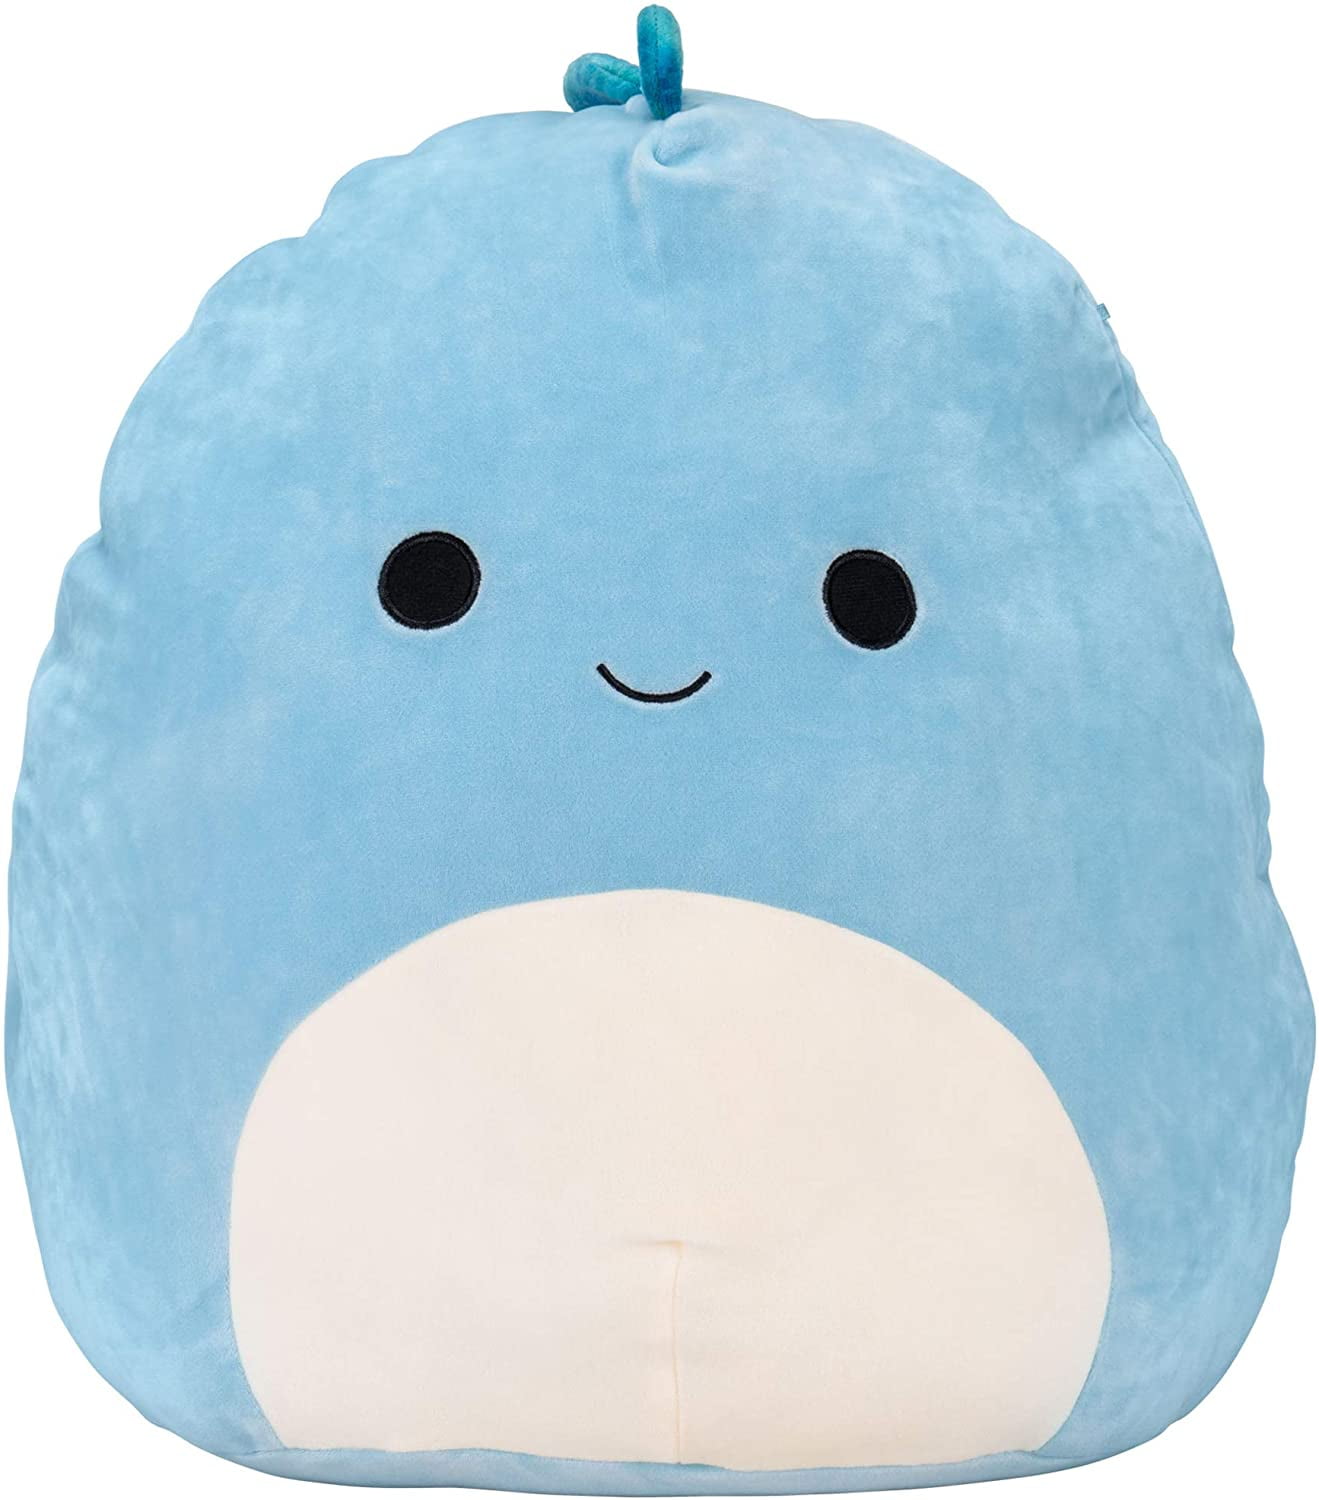 Squishmallow Mint Color Dino 8" Plush Pillow Toy by Kellytoy  NEW Free Ship 